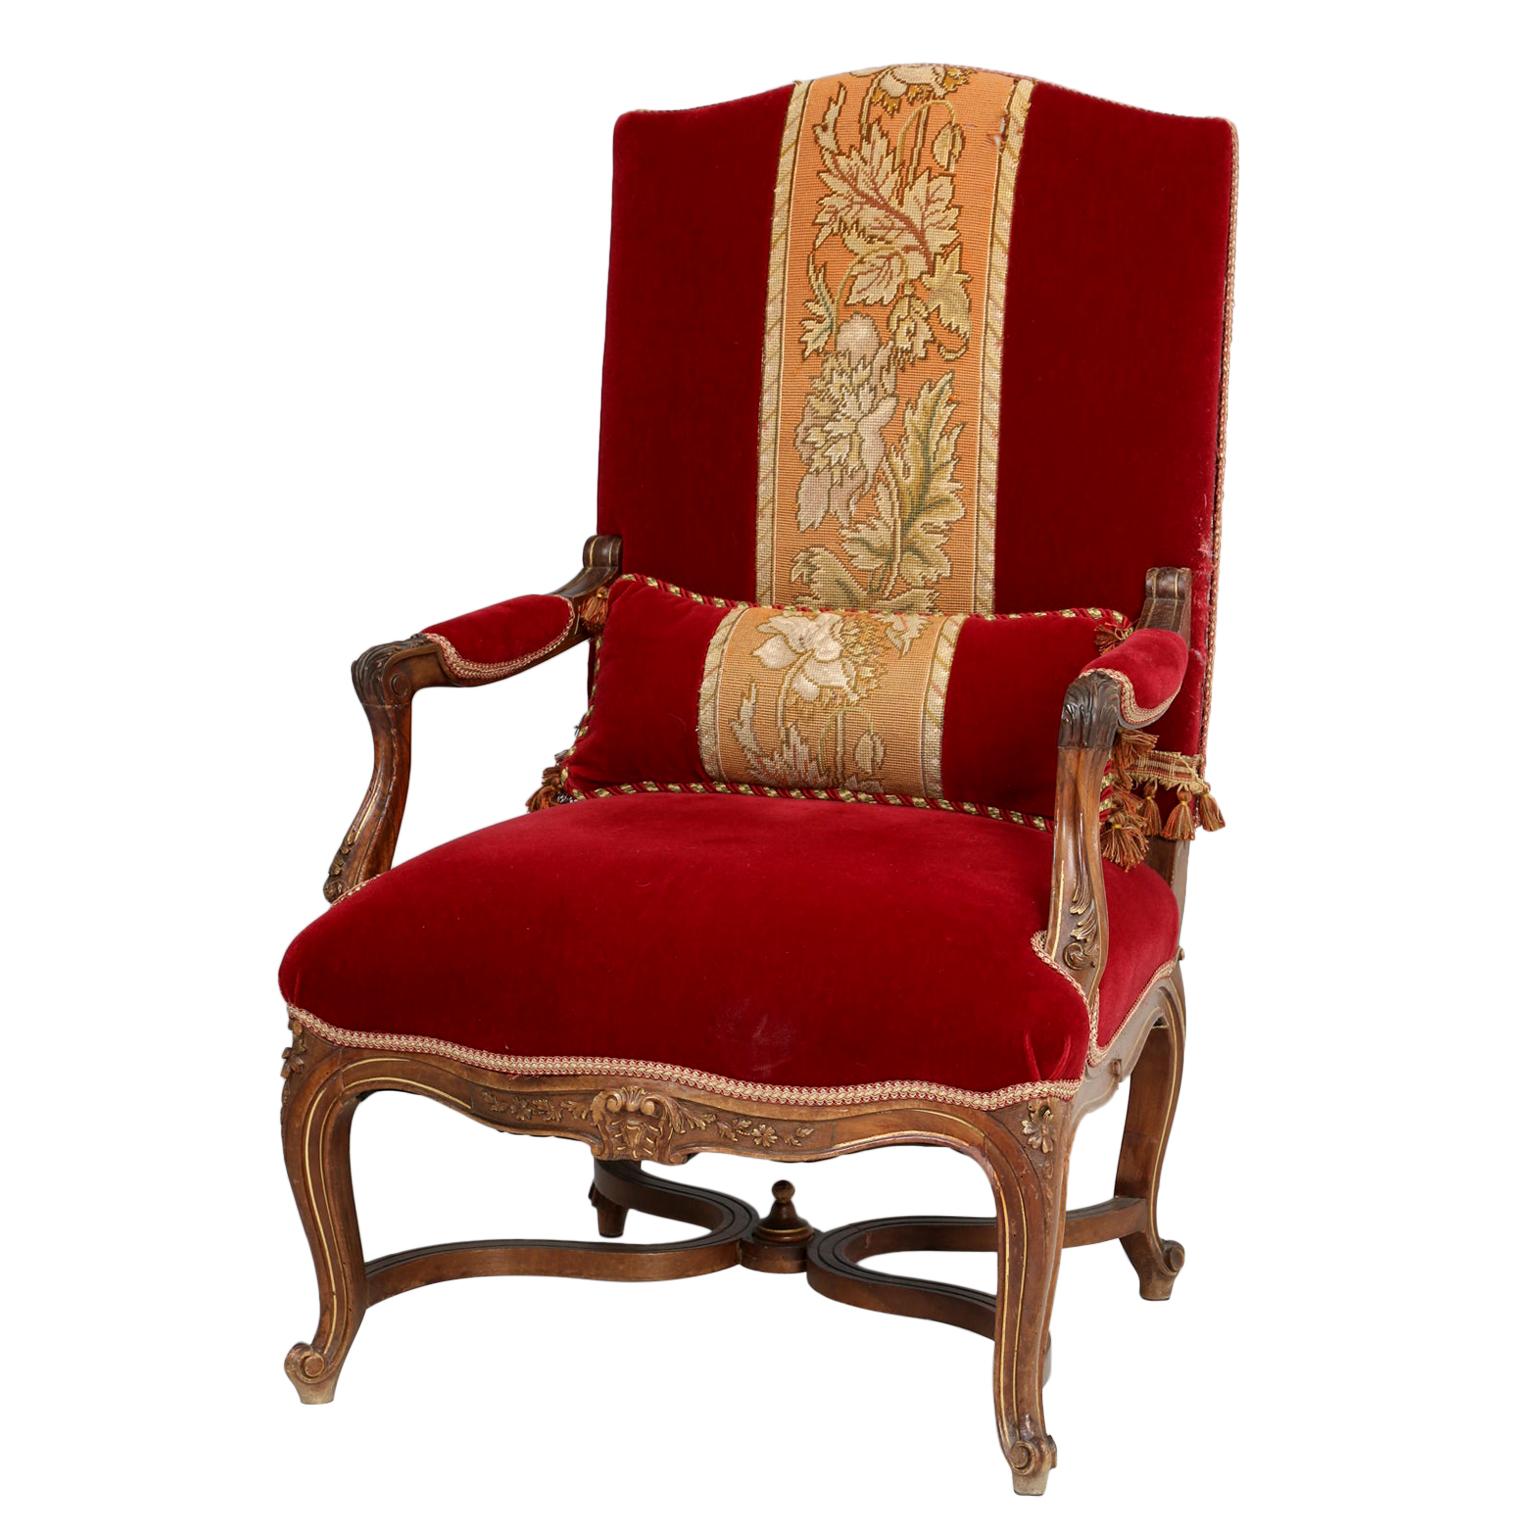 Antique Italian Louis XV Style Throne Chair or Armchair with Gold Accents